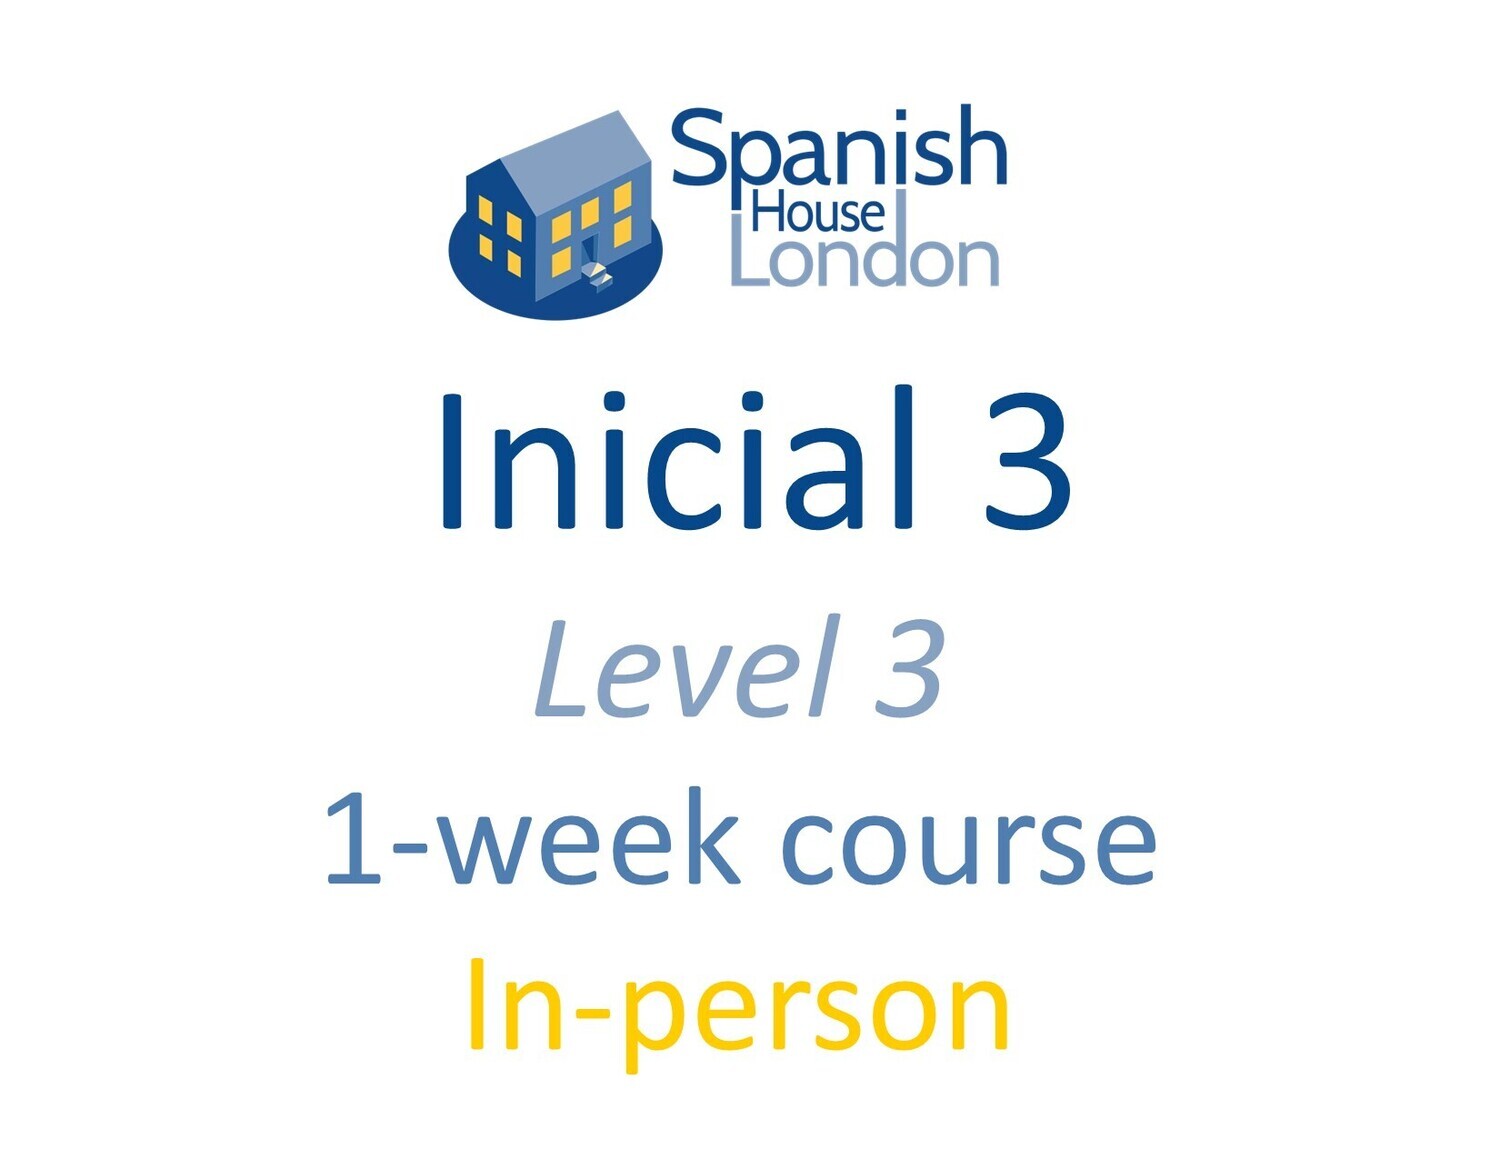 One-Week Intensive Inicial 3 Course starting on 11th March at 10.30am in Clapham North